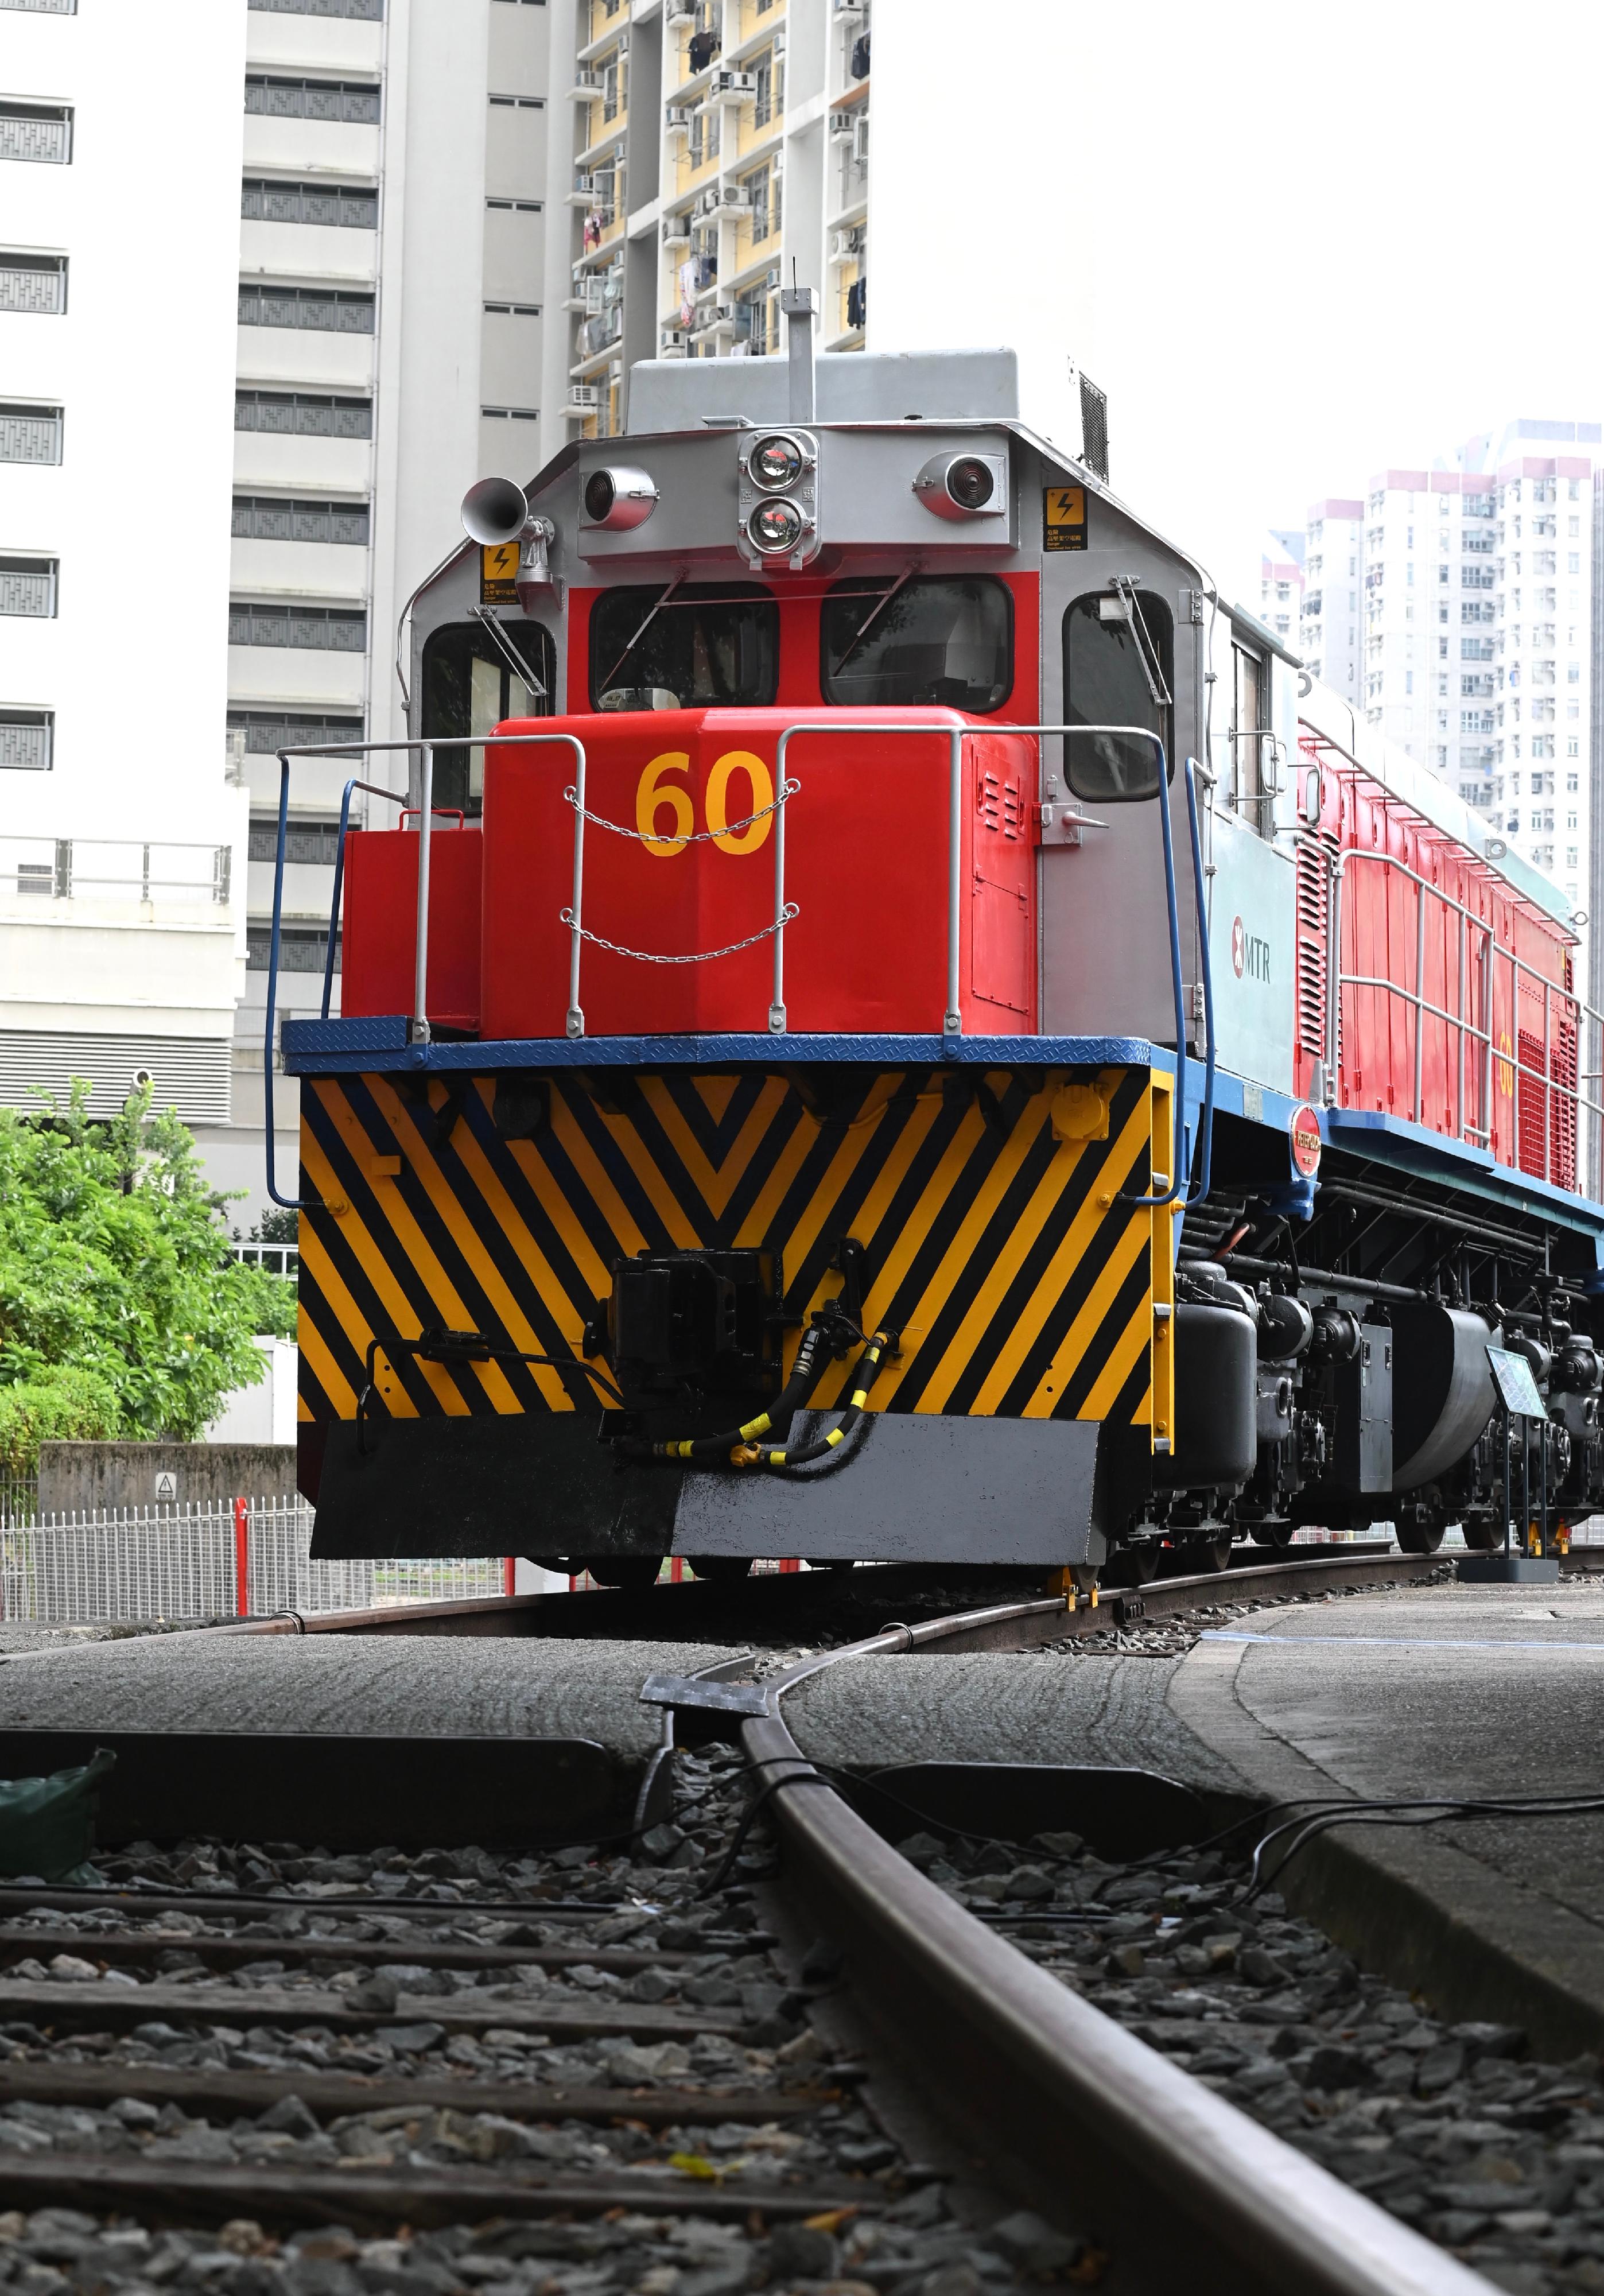 Diesel Electric Engine No. 60 - "Peter Quick" (L60) will be put on display at the Hong Kong Railway Museum starting from tomorrow (October 4).